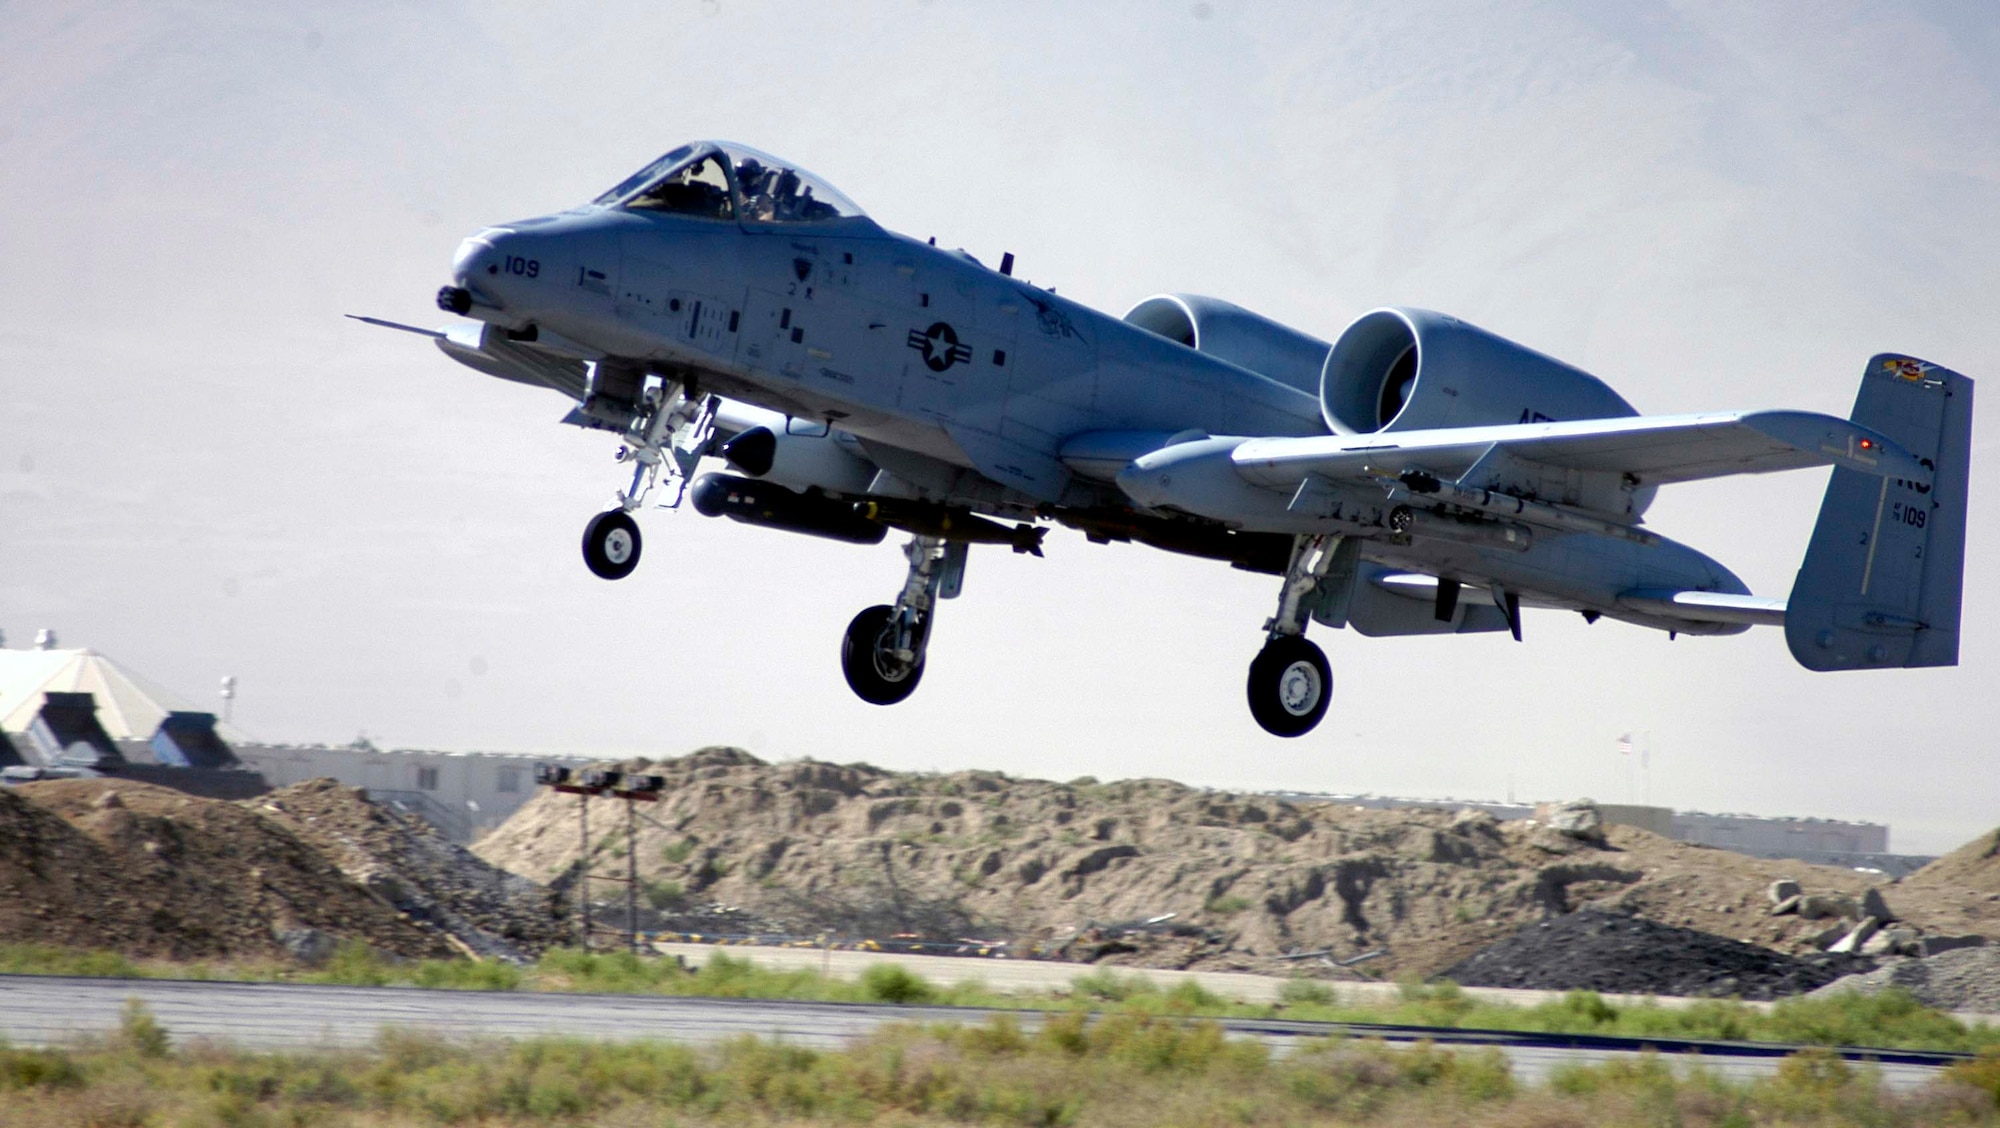 Col. Tony Johnson, an A-10 pilot from the 442nd Fighter Wing, takes off in an A-10 Thunderbolt II from Bagram Airfield, Afghanistan, in June.  Colonel Johnson is deployed here from Whiteman Air Force Base, Mo., where he commands the 442nd Operations Group. He is serving as the commander of the 455th Expeditionary Operations Group while at Bagram.  Airmen from the 442nd make up half of the A-10 effort here, the lead unit is from the active duty's 52nd Fighter Wing at Spangdahlem Air Base, Germany.  (US Air Force photo/Maj. David Kurle)